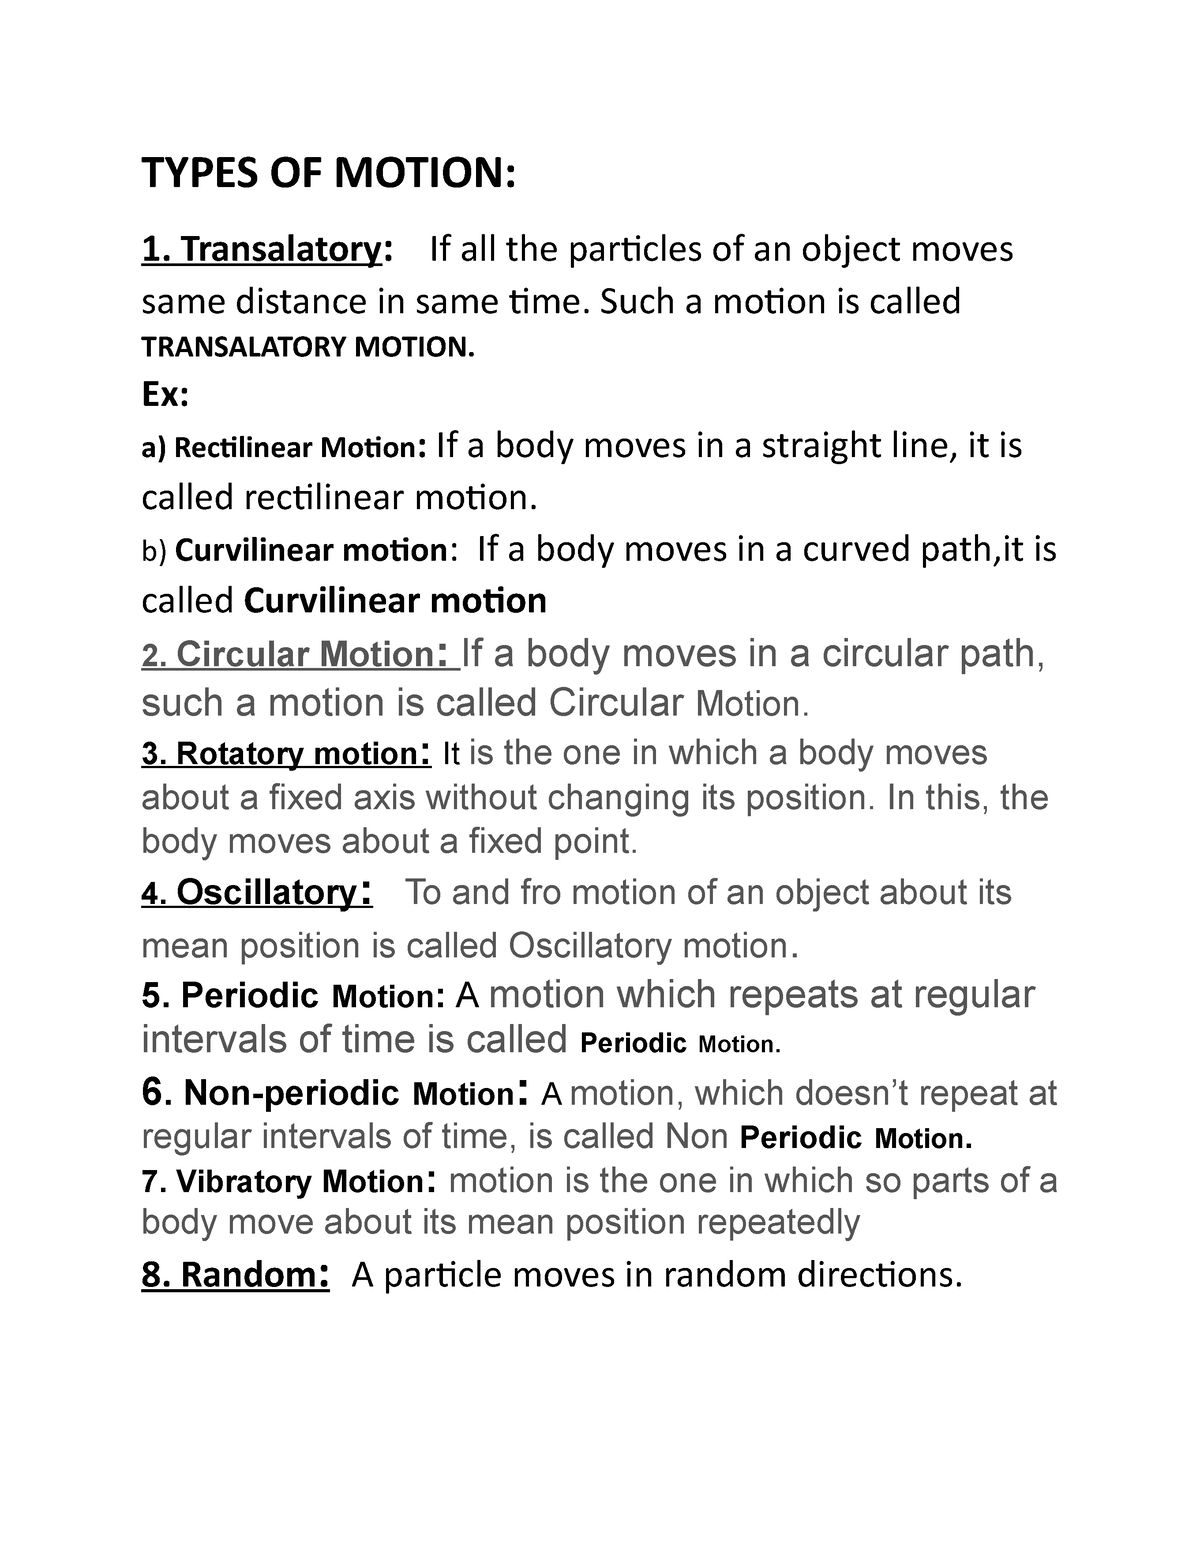 Types of motion